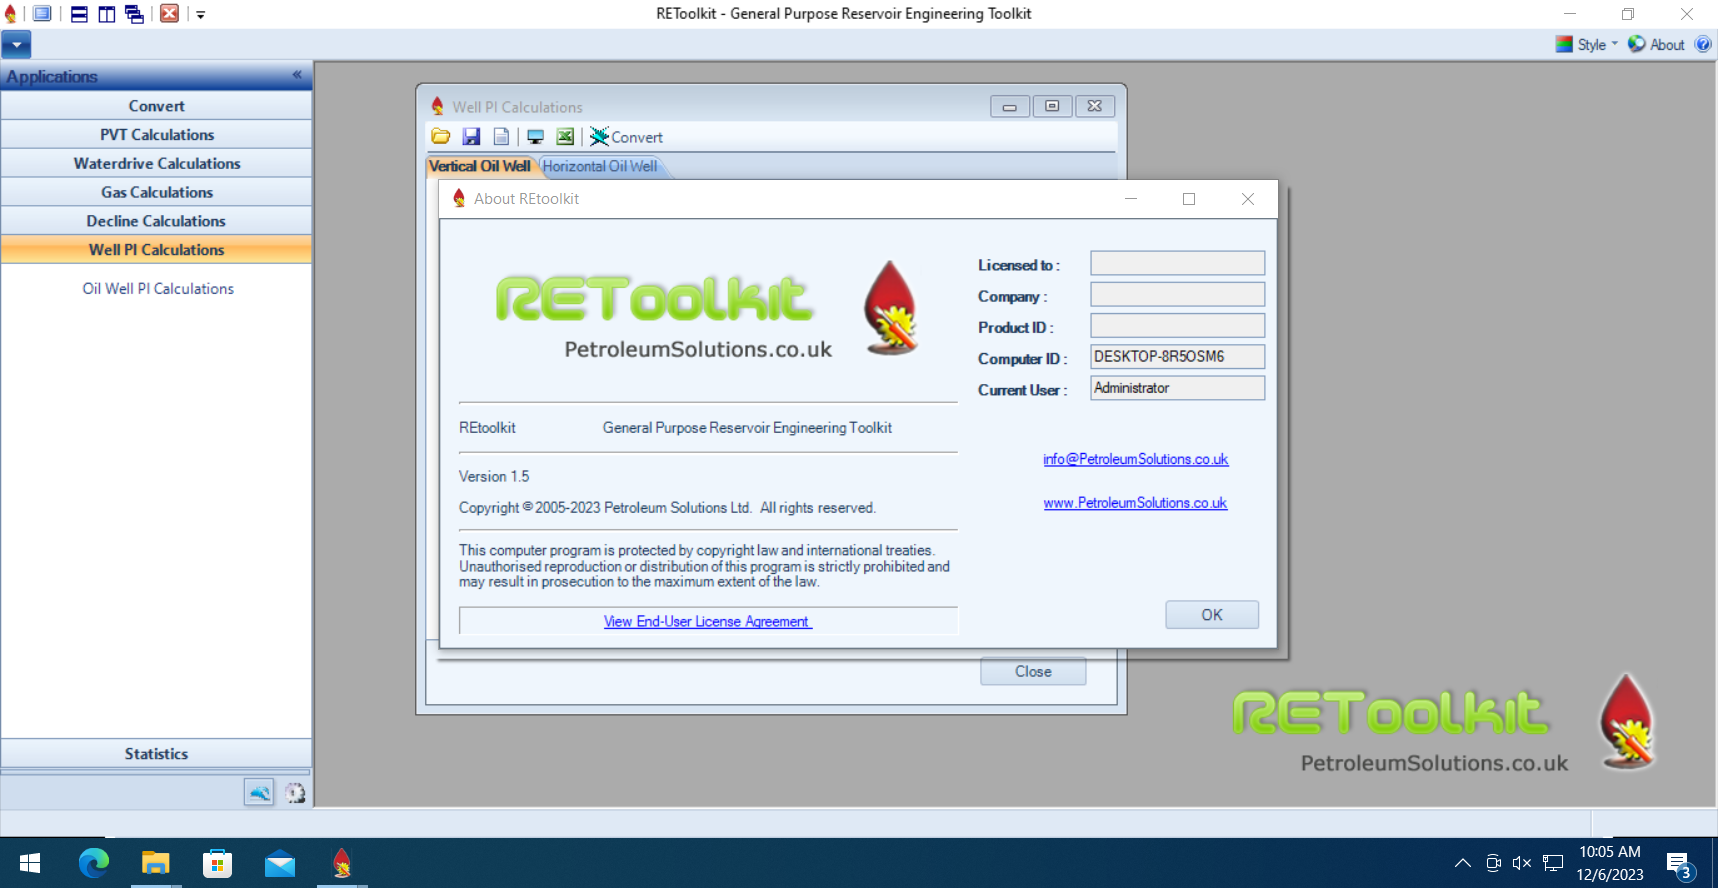 Working with Petroleum Solutions REToolKit 2023 v1.5 full license